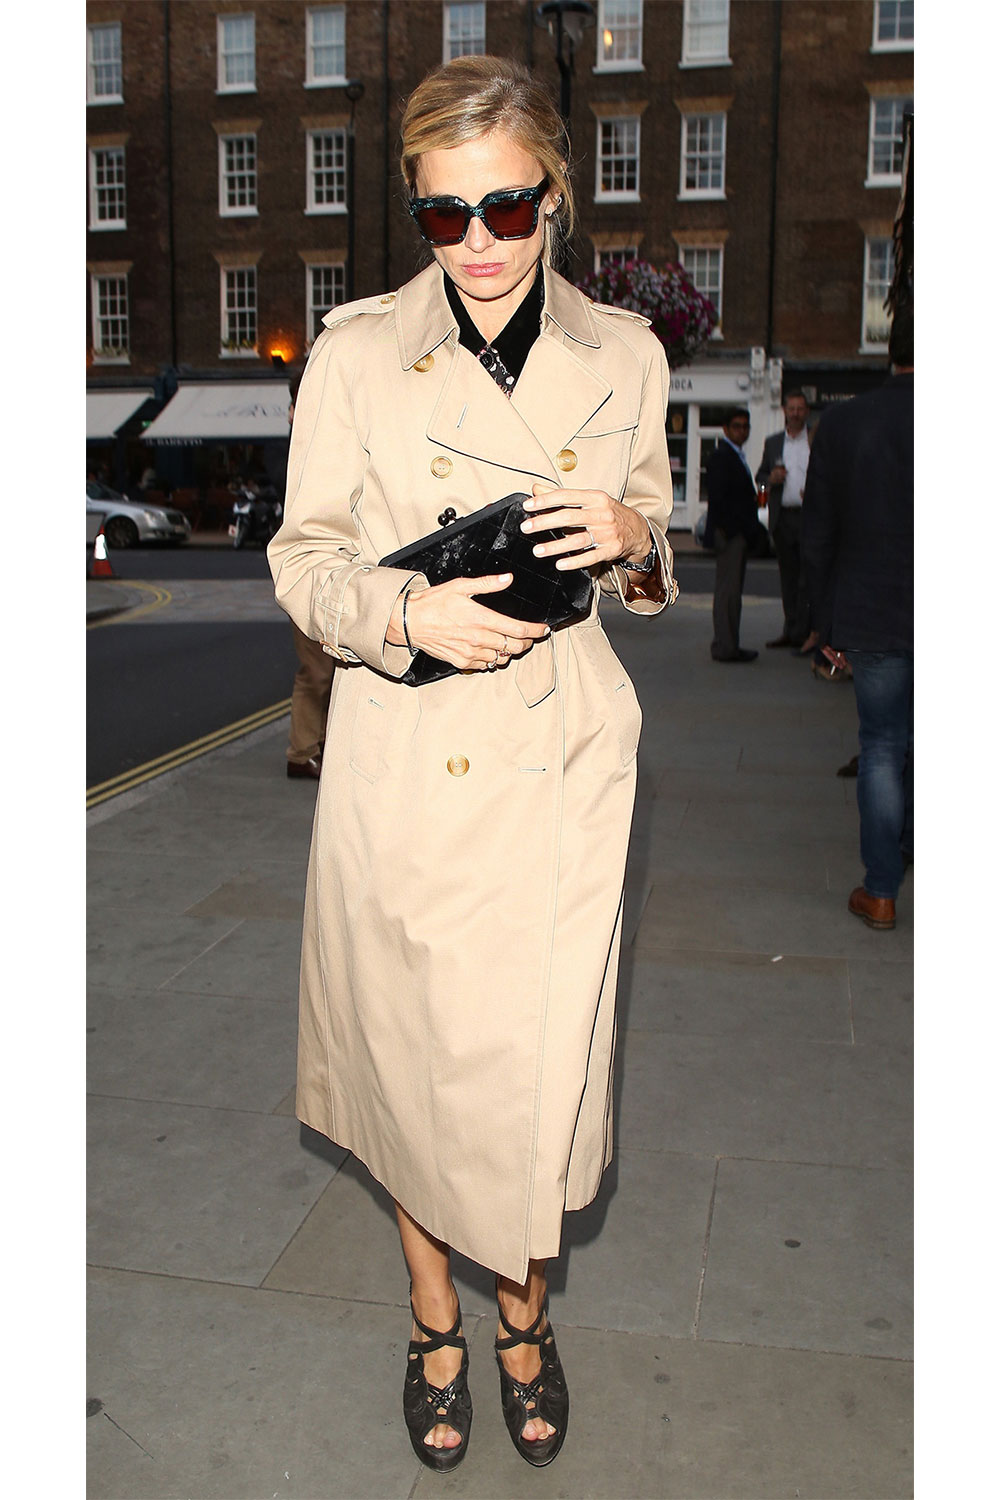 Model and fashion writer Laura Bailey looks chic in a long trenchcoat, while leaving London's Chiltern Firehouse. Photo / Getty Images